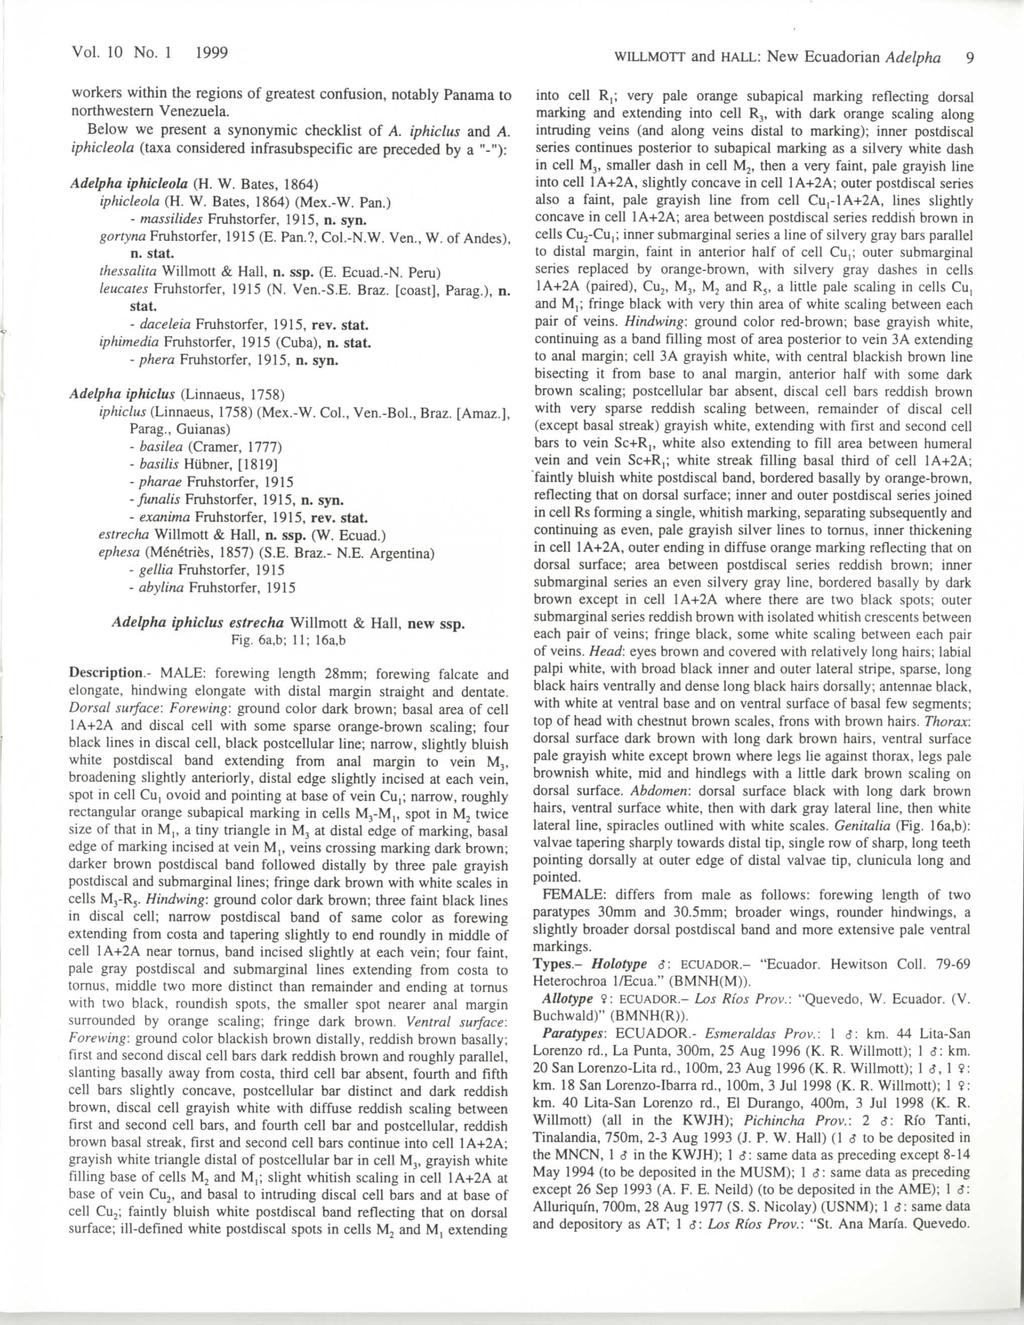 Vol. 10 No. 1 1999 WILLMOTT and HALL: New Ecuadorian Adelpha 9 workers within the regions of greatest confusion, notably Panama to northwestern Venezuela. Below we present a synonymic checklist of A.